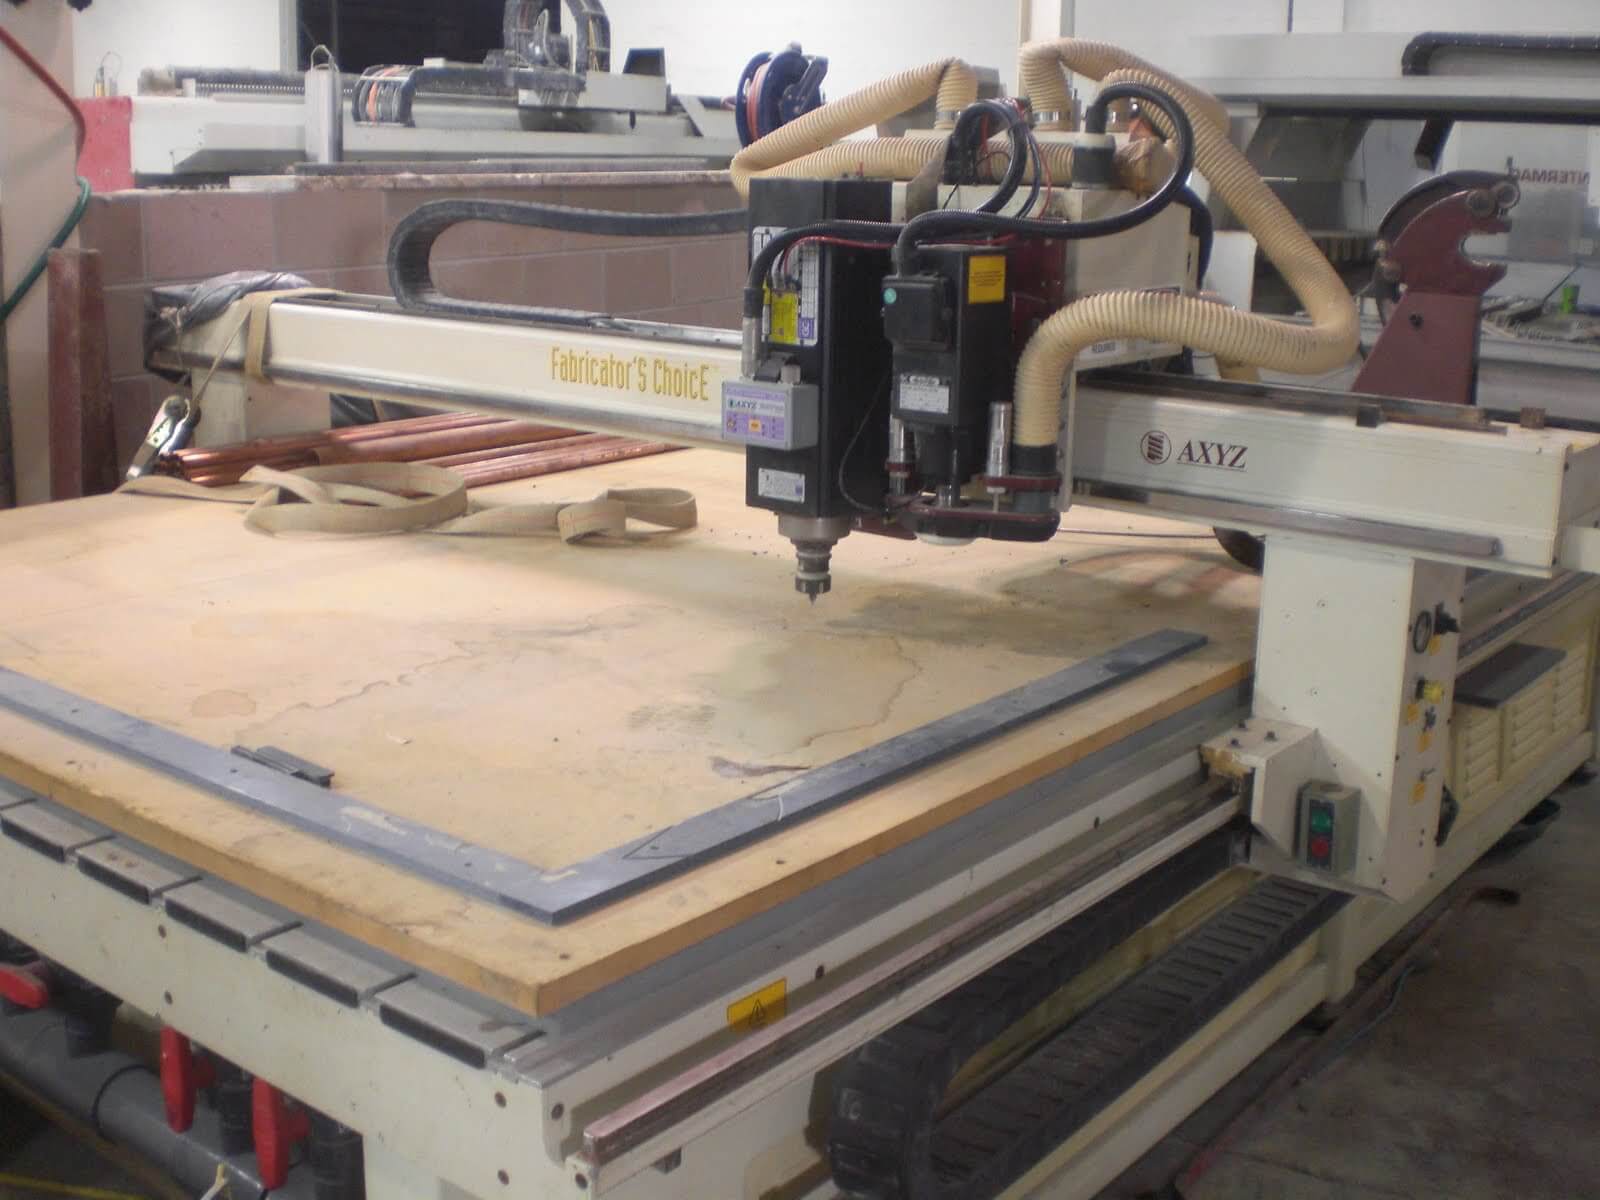 Cutting Pizza Peels on a CNC Router